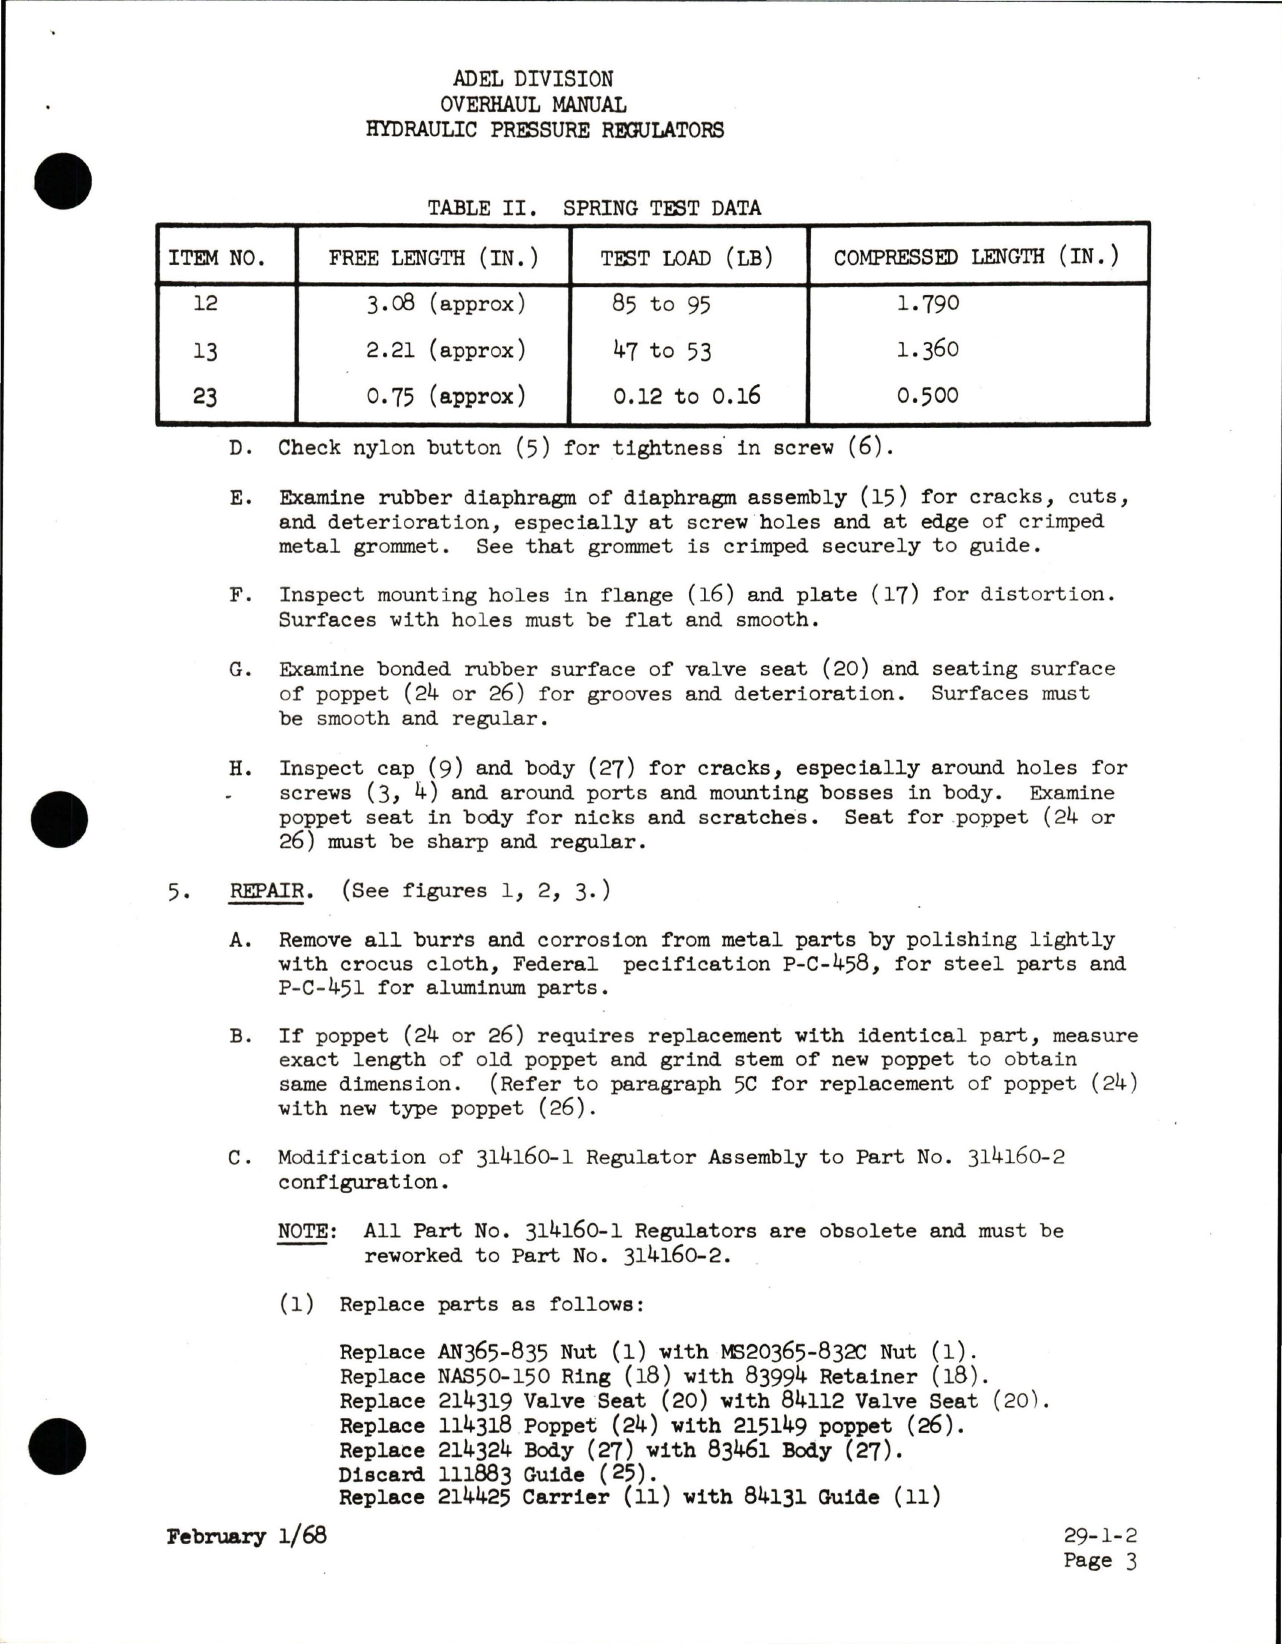 Sample page 7 from AirCorps Library document: Overhaul Manual for Hydraulic Reservoir Pressure Regulators - Parts 314160 and 314160-2